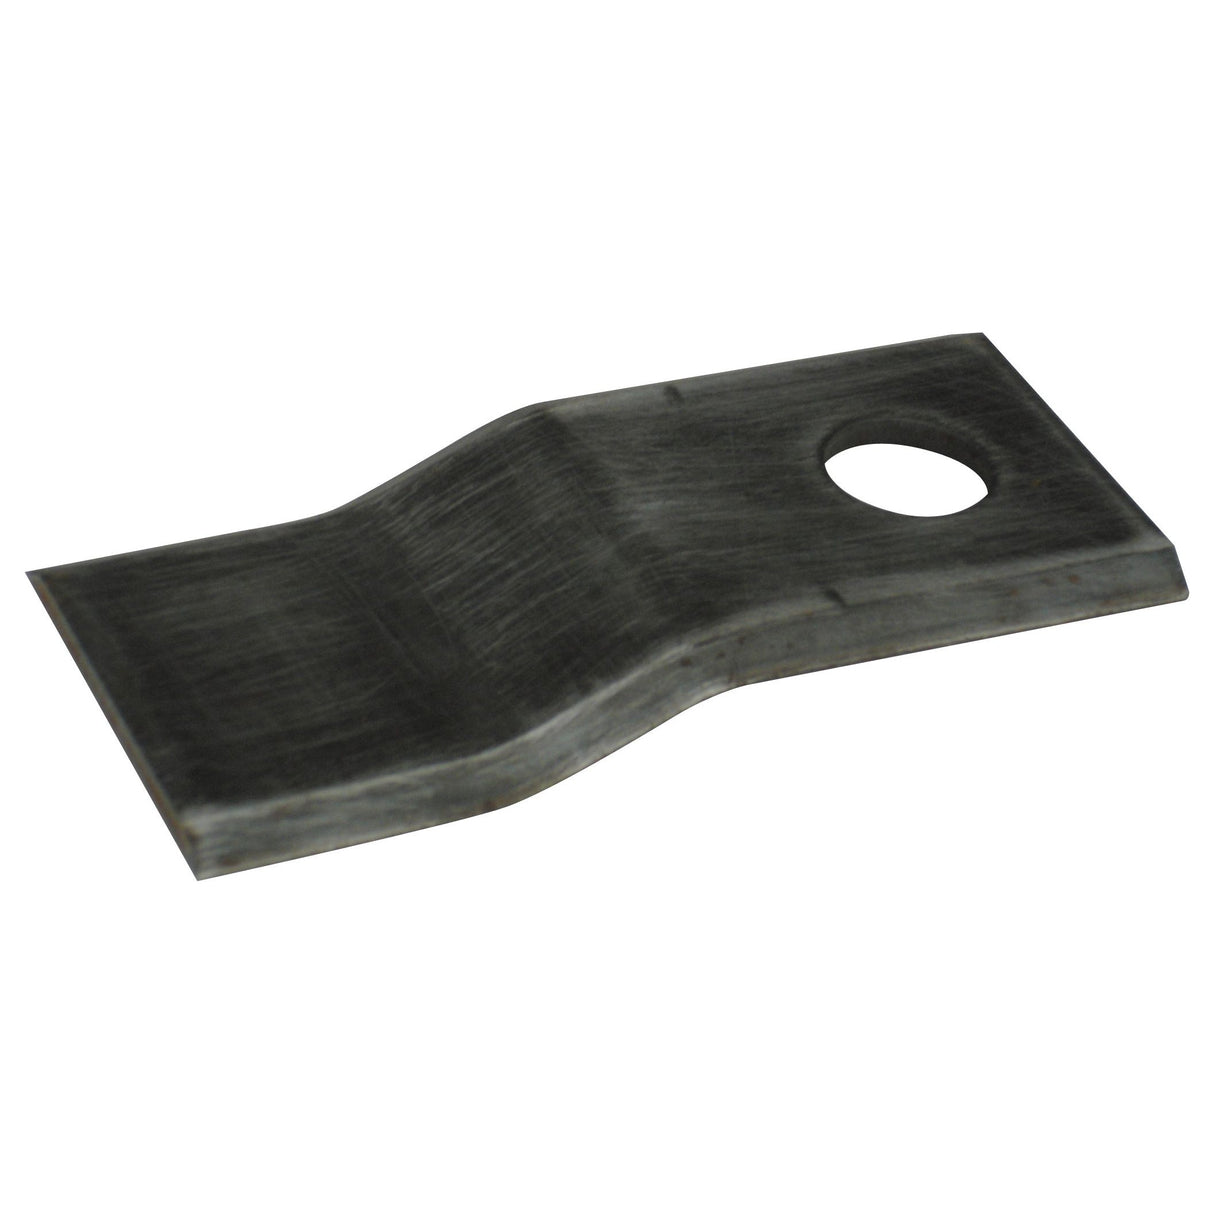 Mower Blade - Stepped Blade -  107 x 50x4mm - Hole⌀17mm  - RH & LH -  Replacement for Maxam
 - S.59739 - Farming Parts